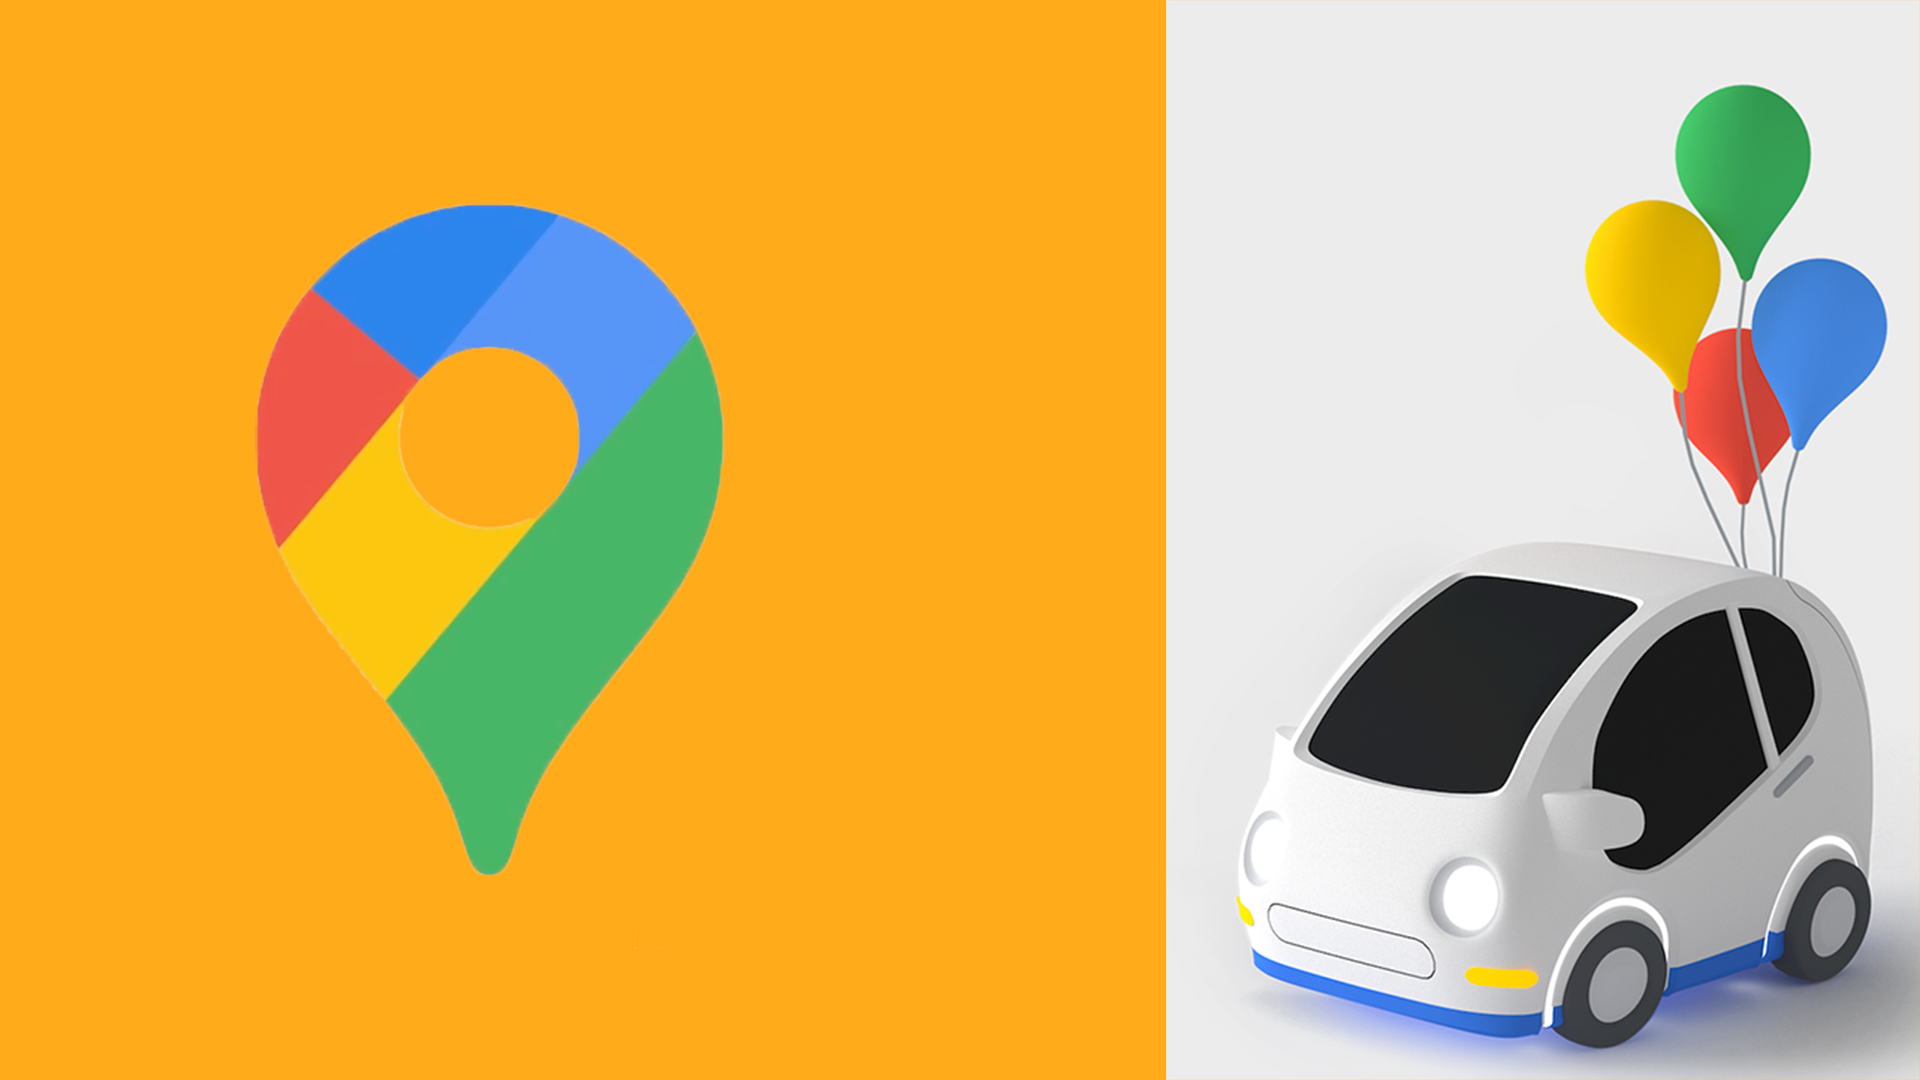 Google Maps new logo and car icon 2020